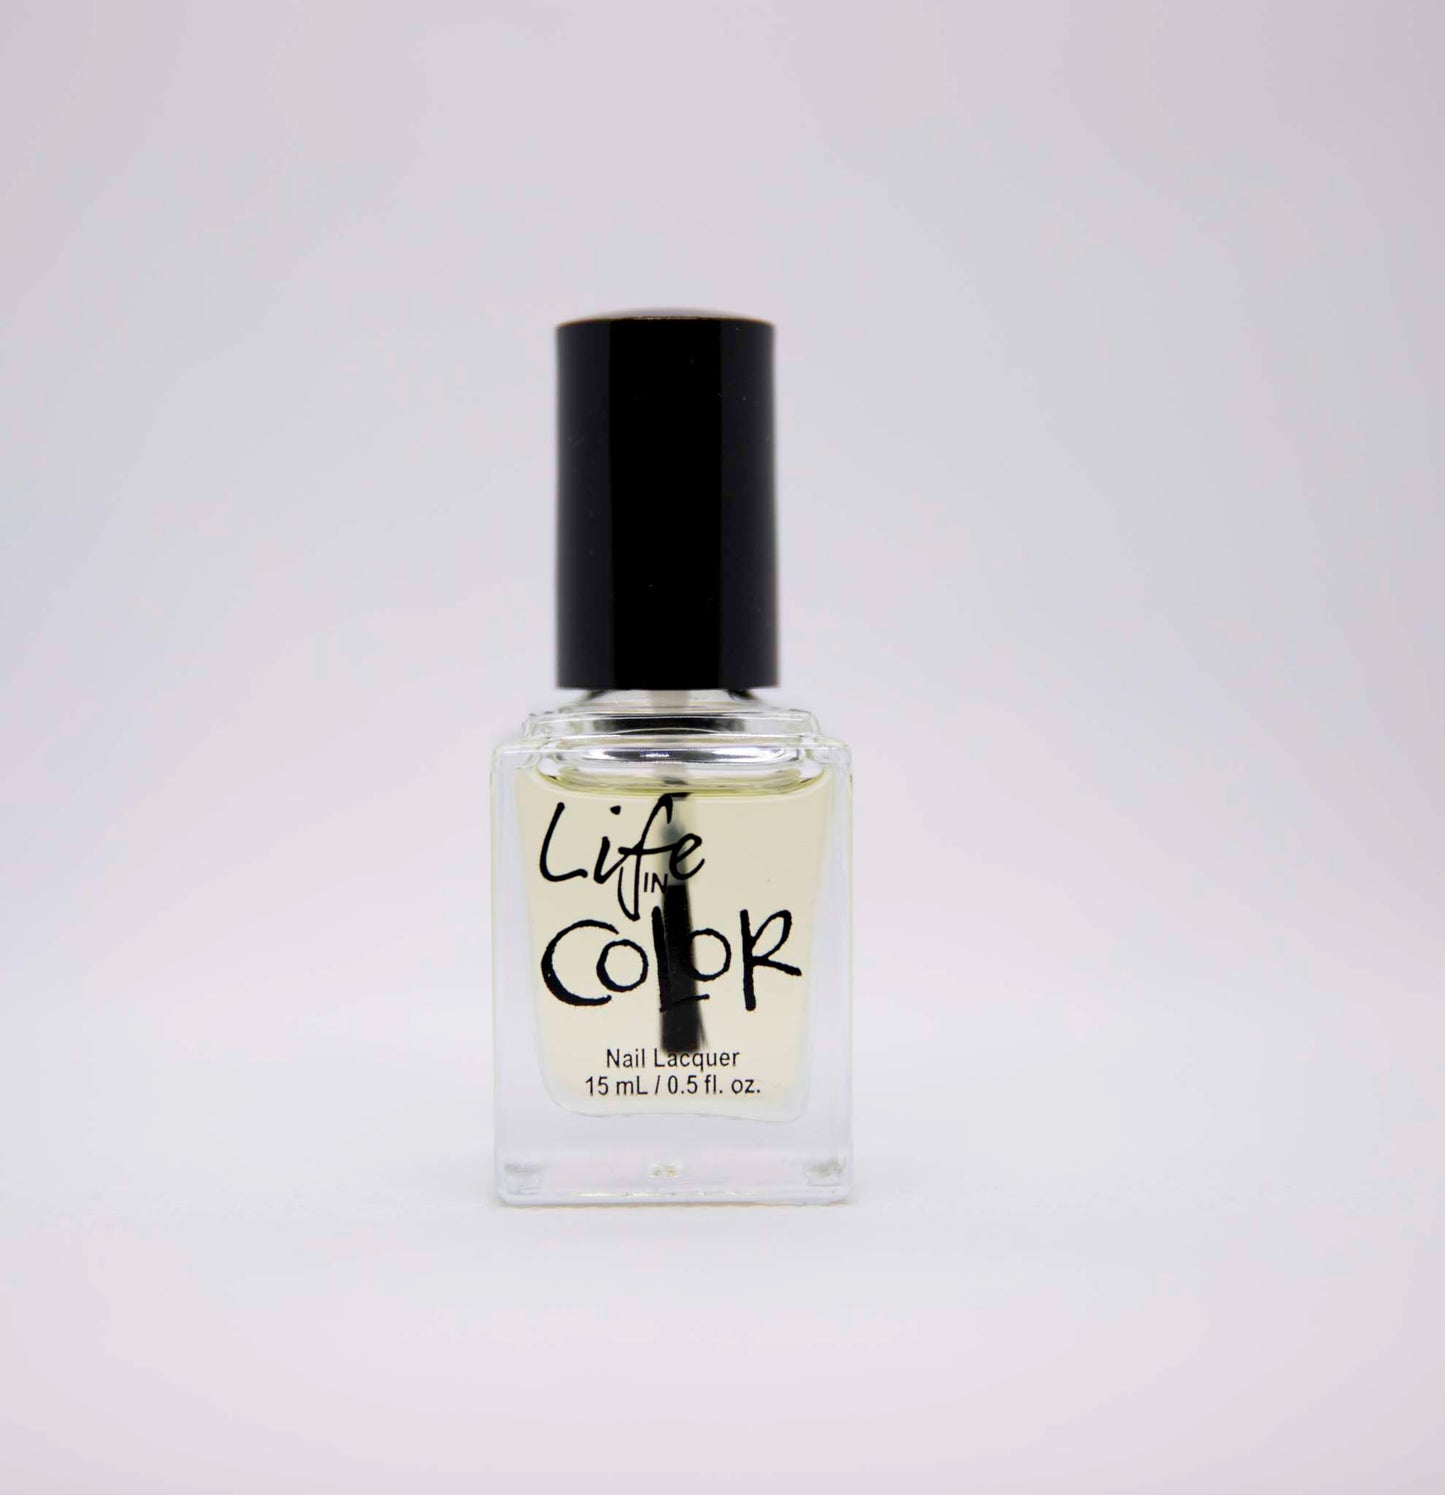 Cuticle Oil infused with Madagascar Vanilla